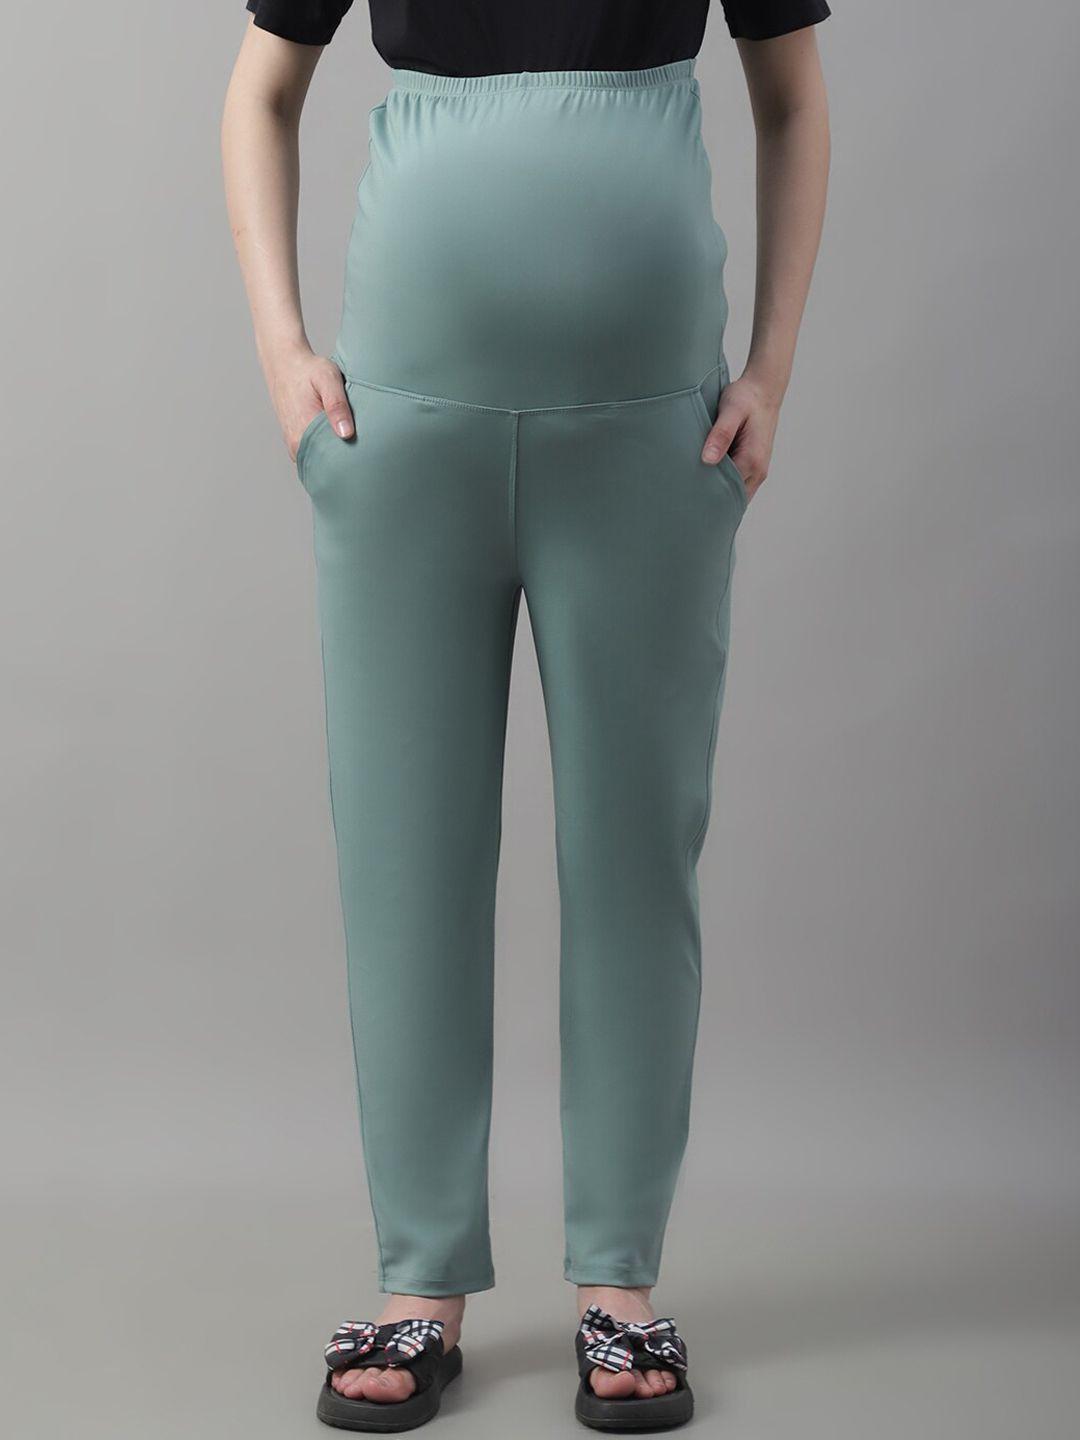 frempy-high-rise-maternity-trousers